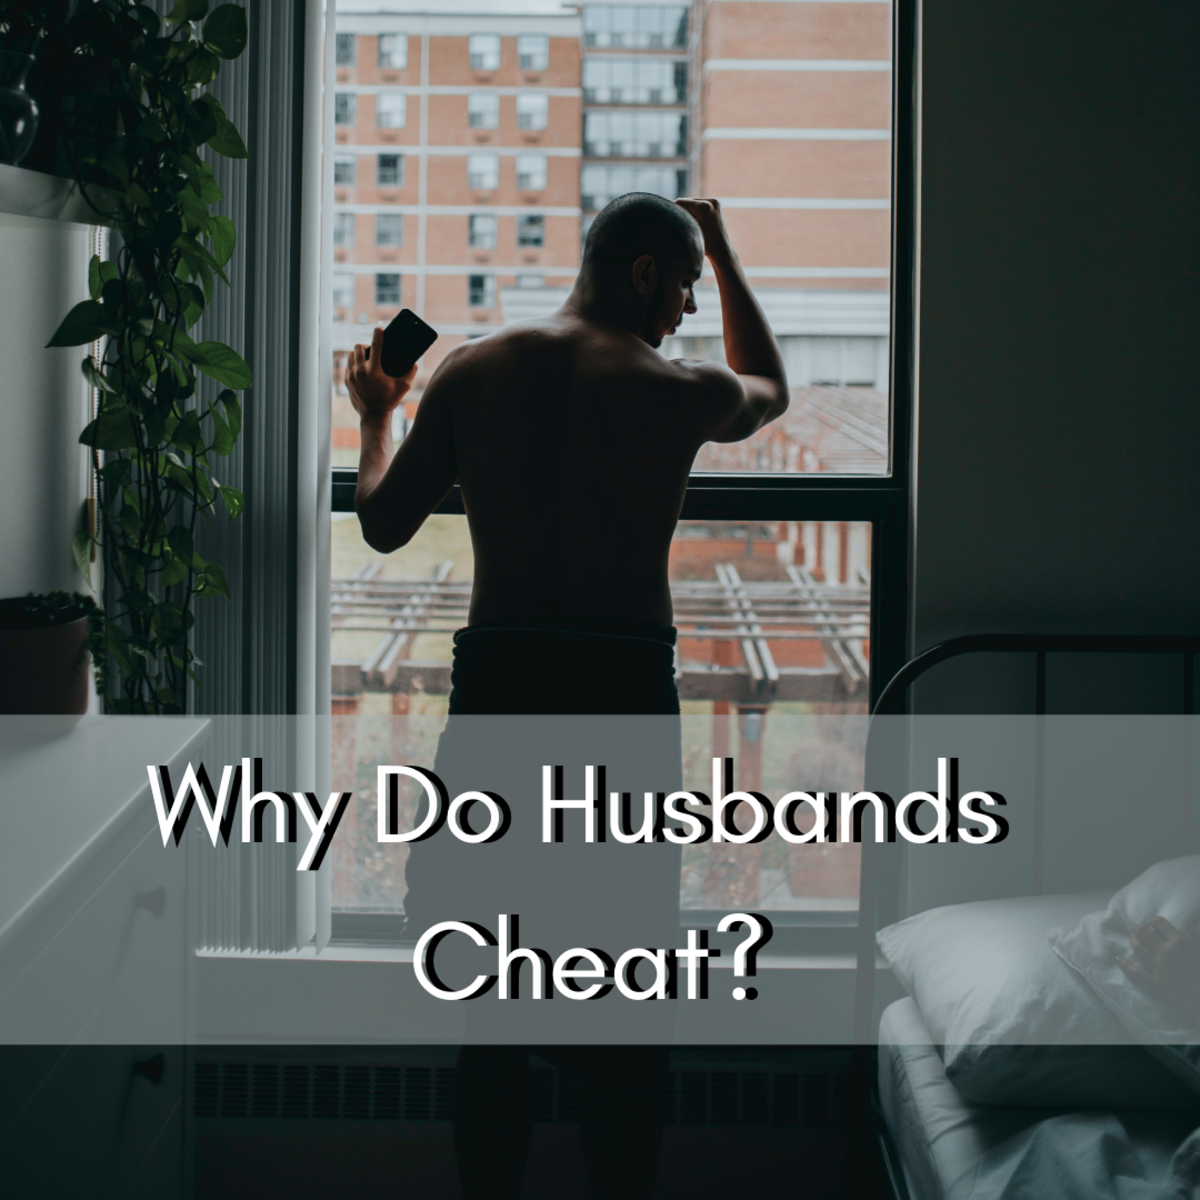 Why Is Your Husband Having an Affair?